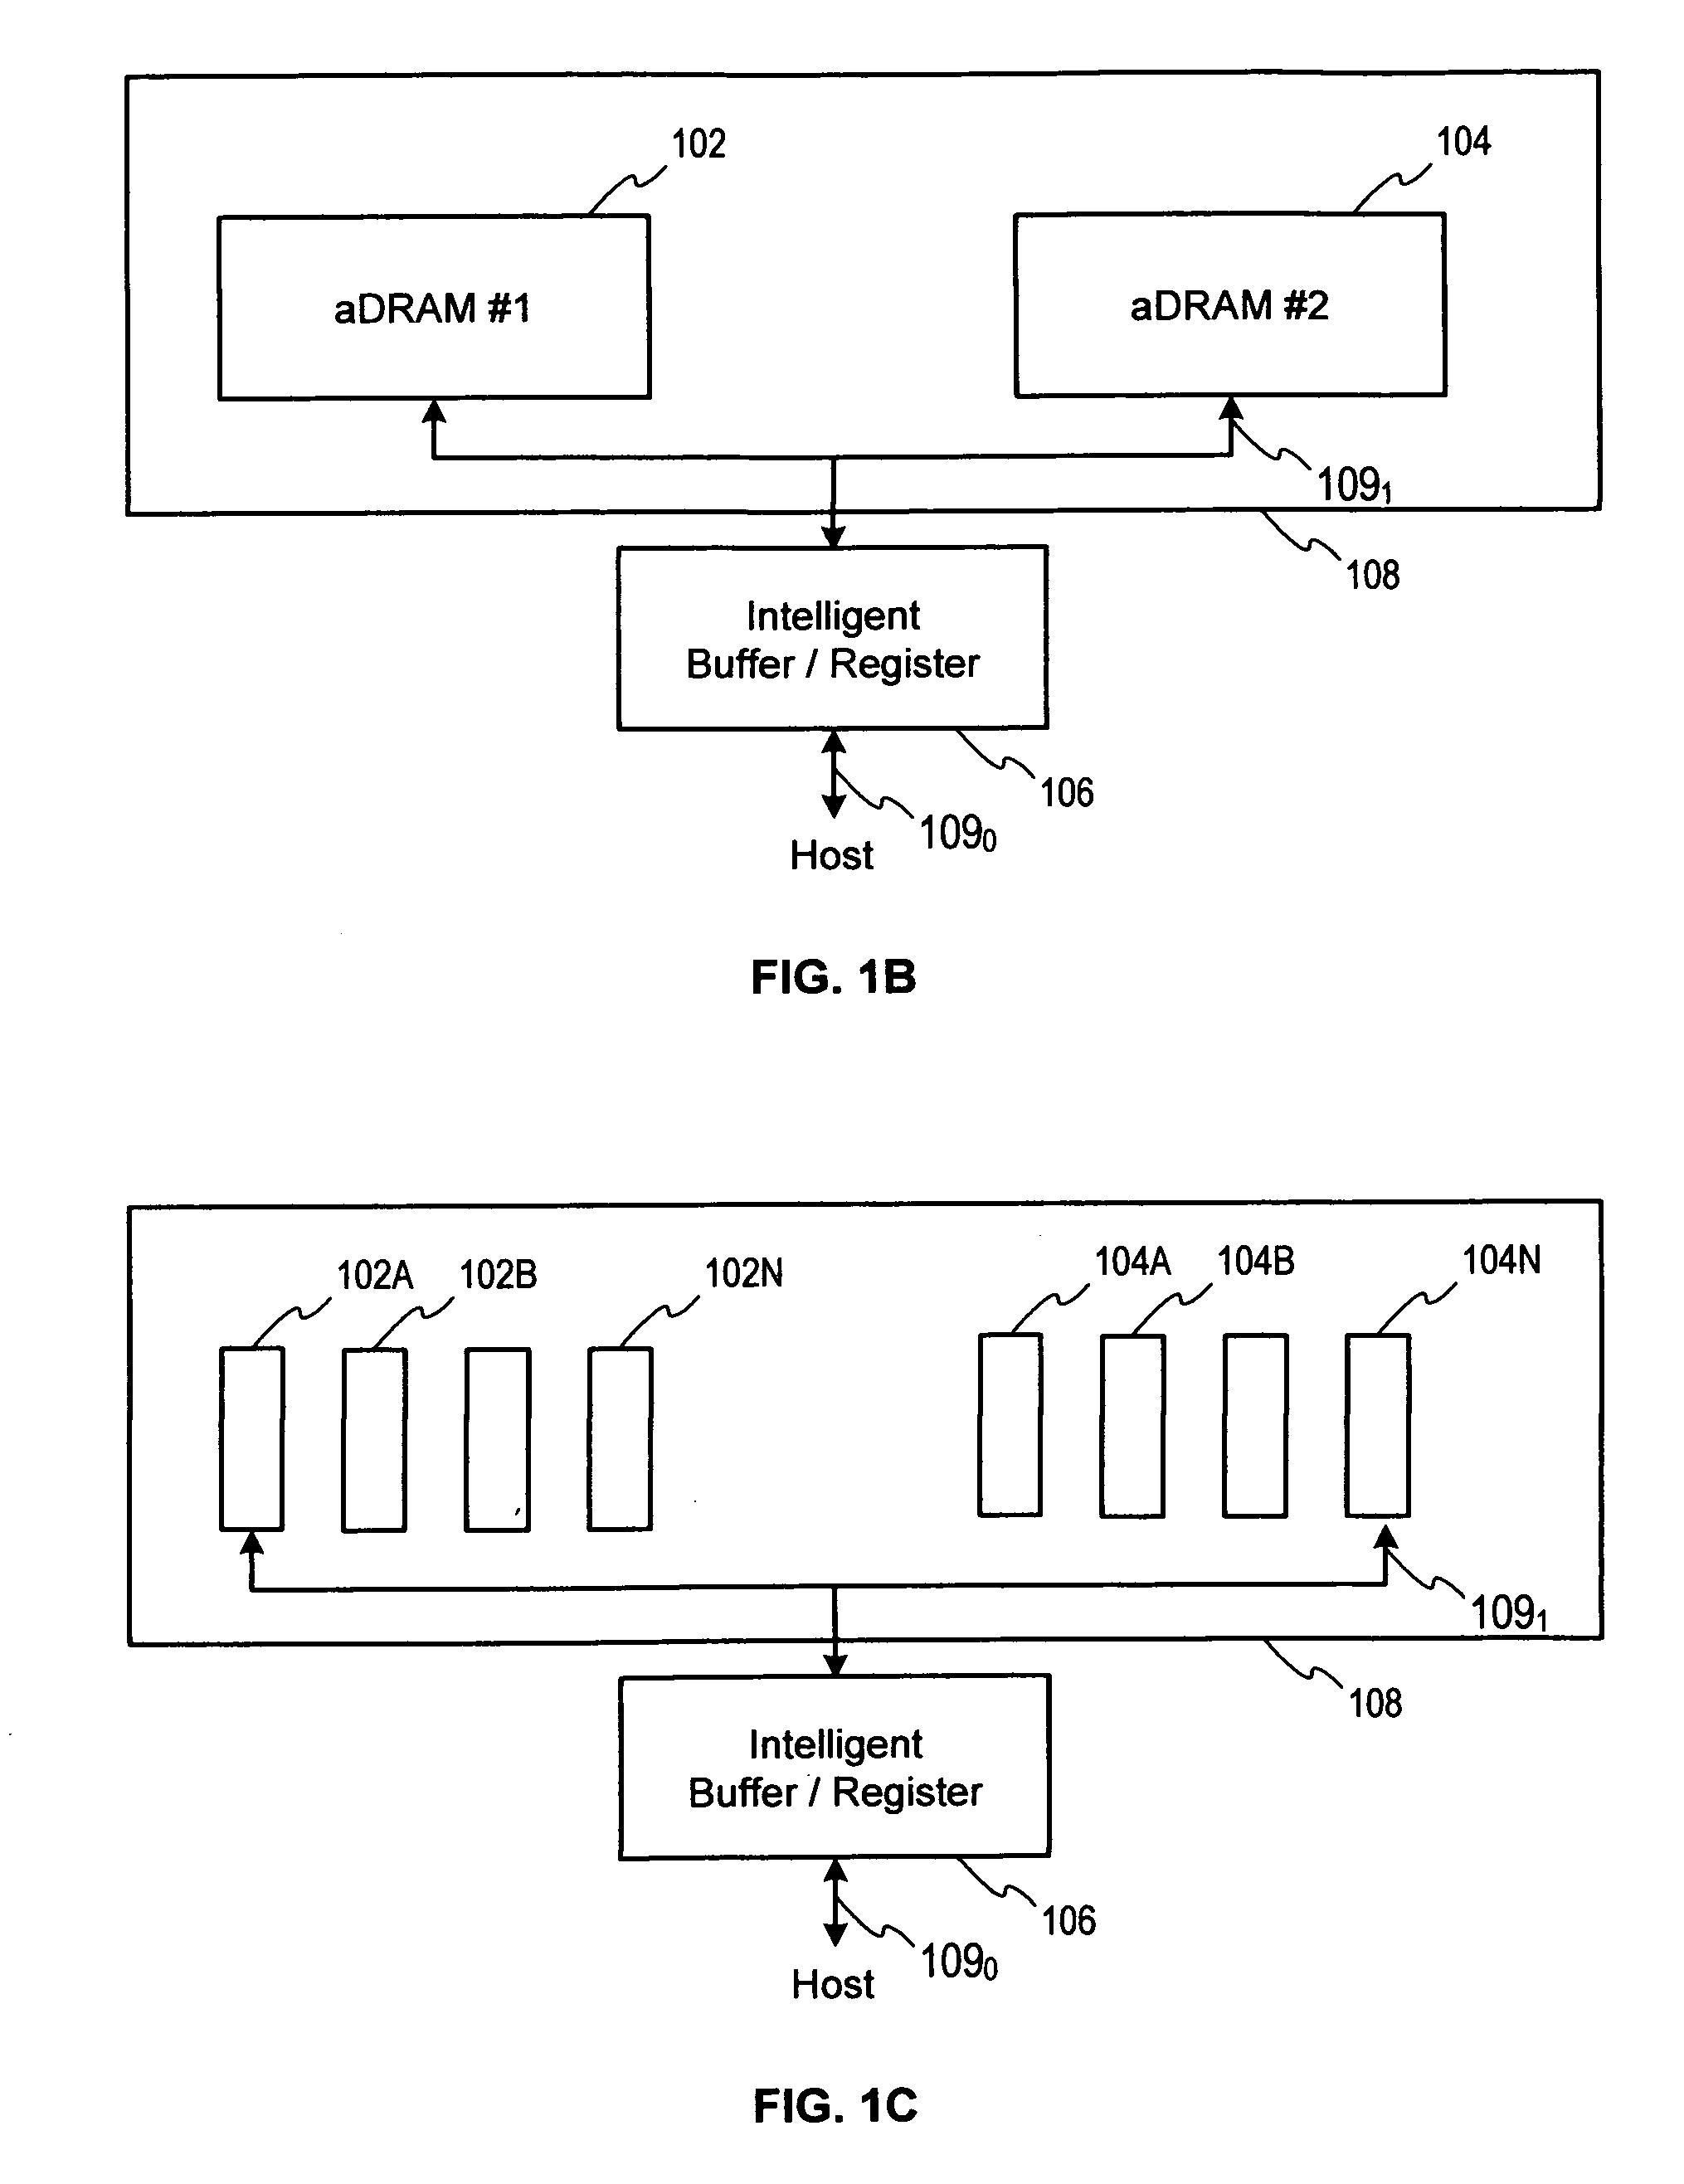 Emulation of abstracted DIMMs using abstracted DRAMs